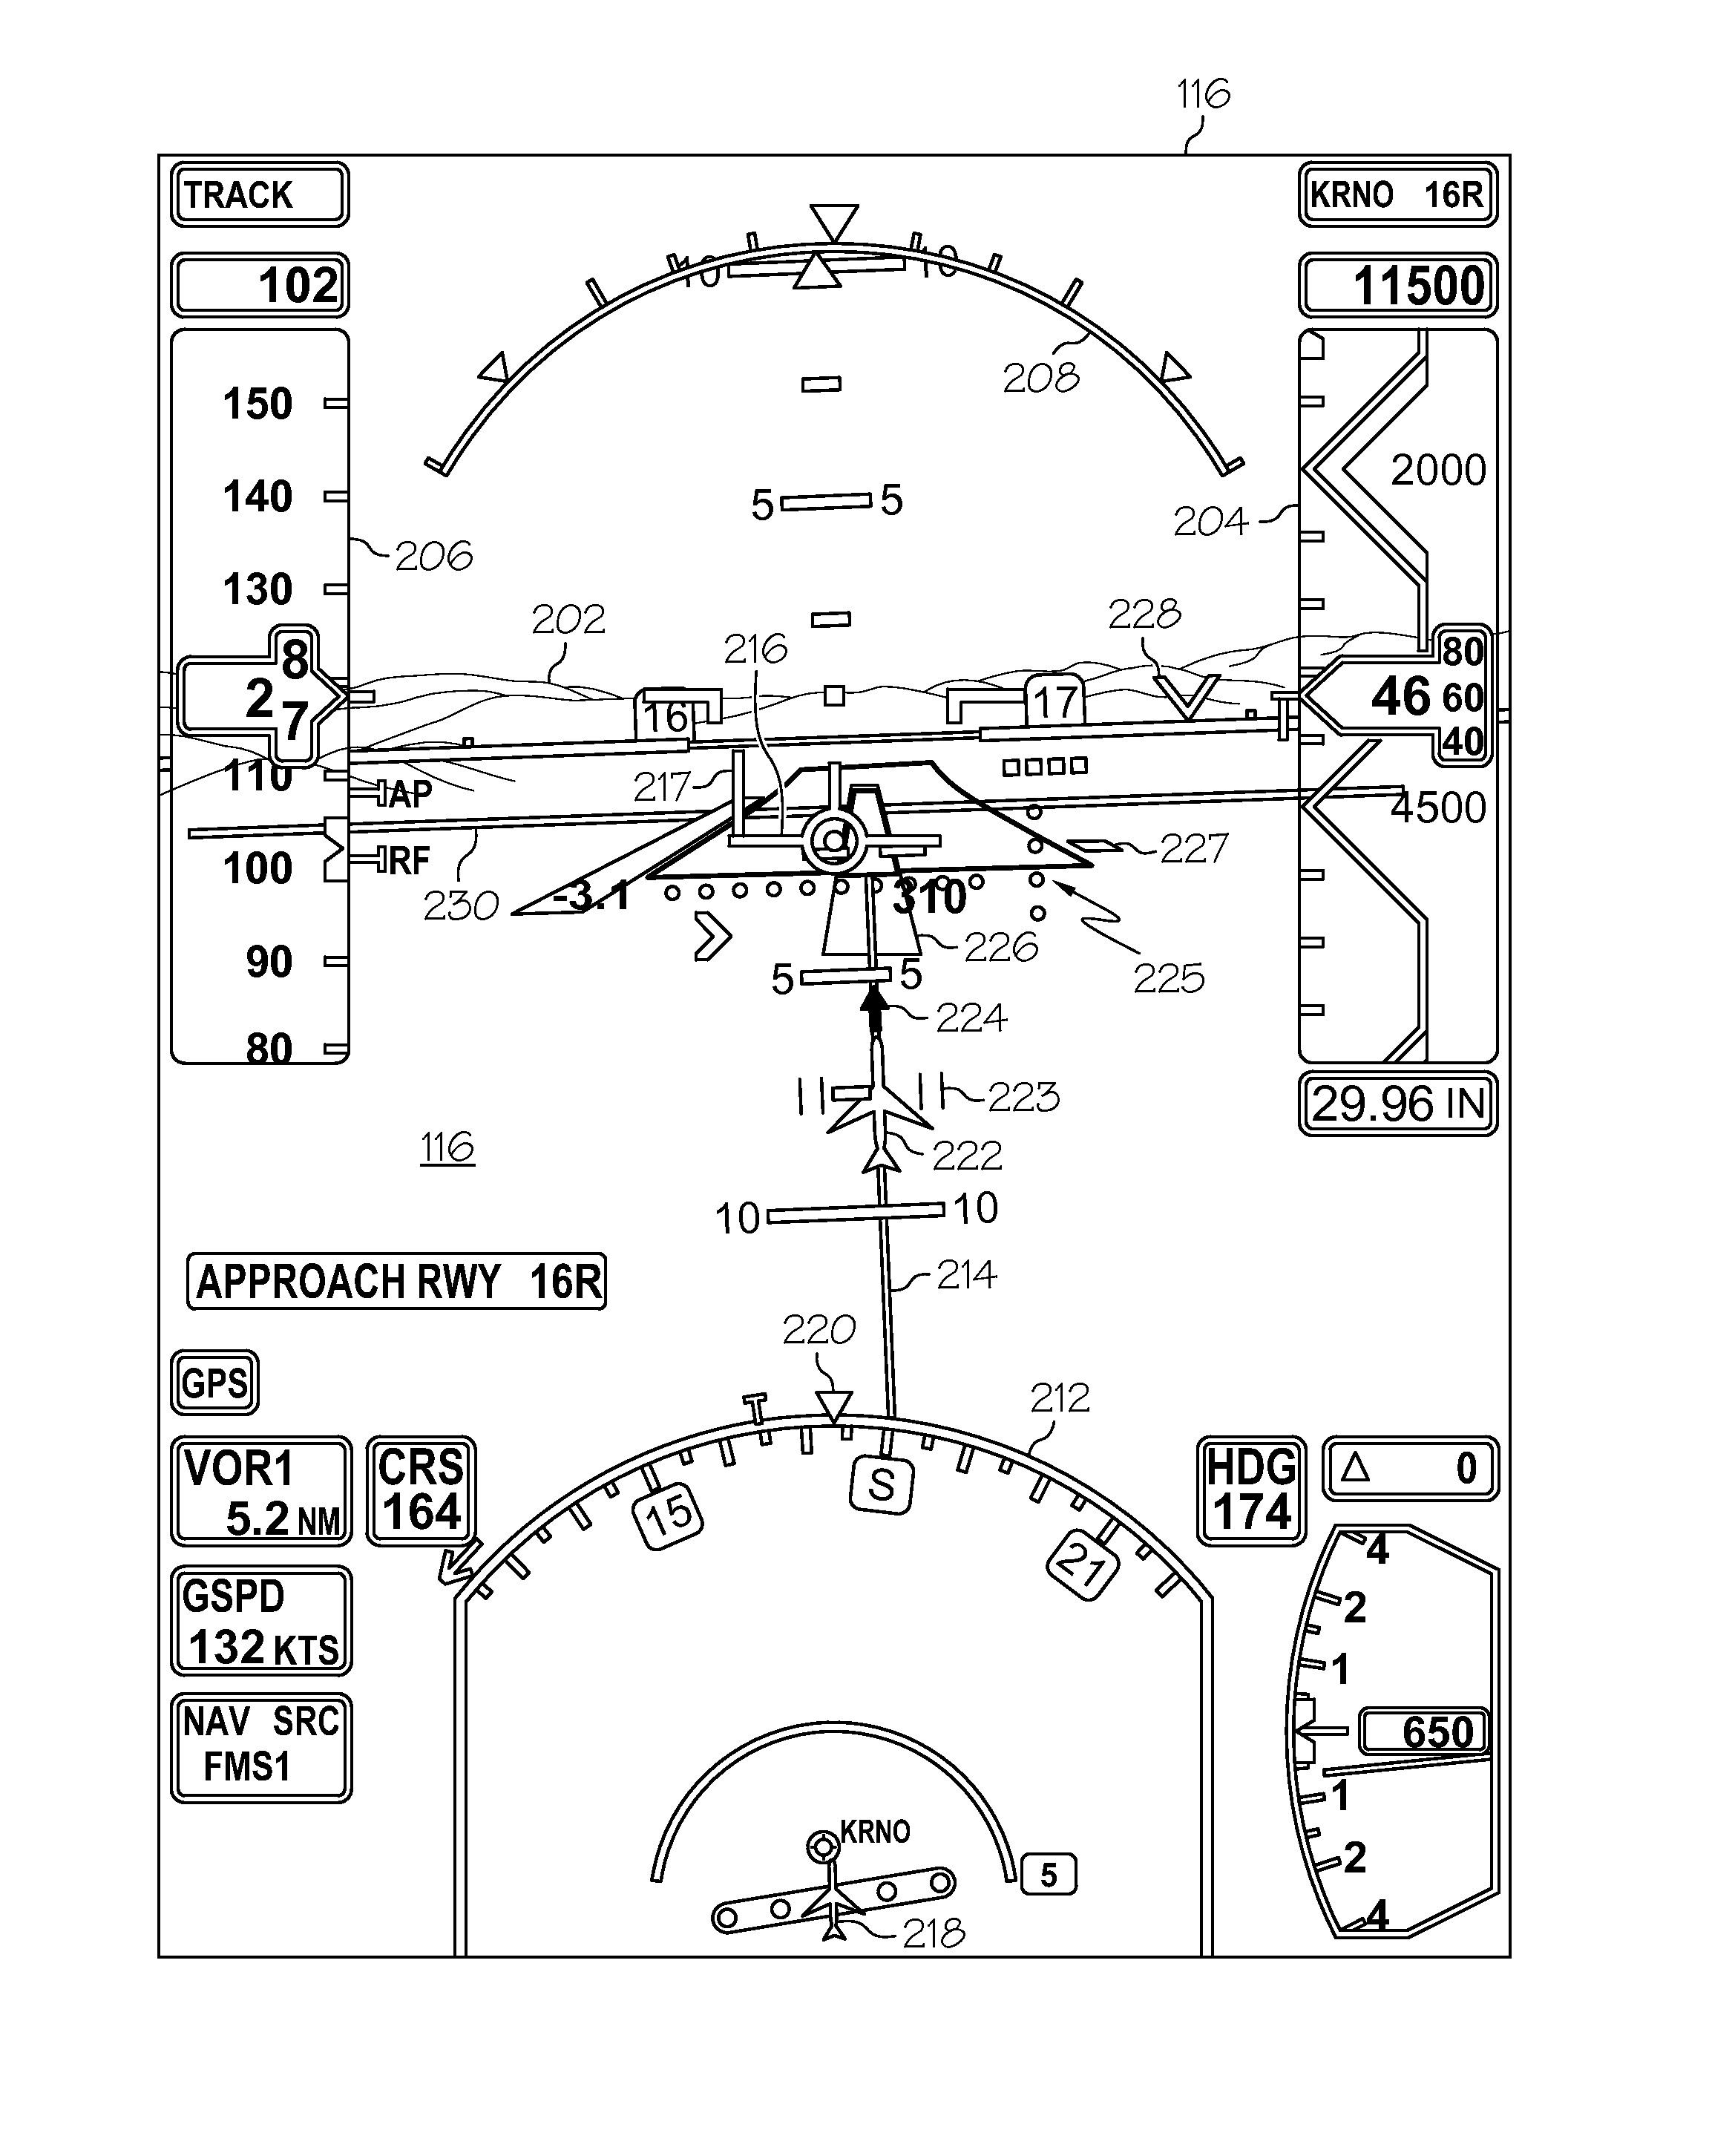 Aircraft synthetic vision systems utilizing data from local area augmentation systems, and methods for operating such aircraft synthetic vision systems